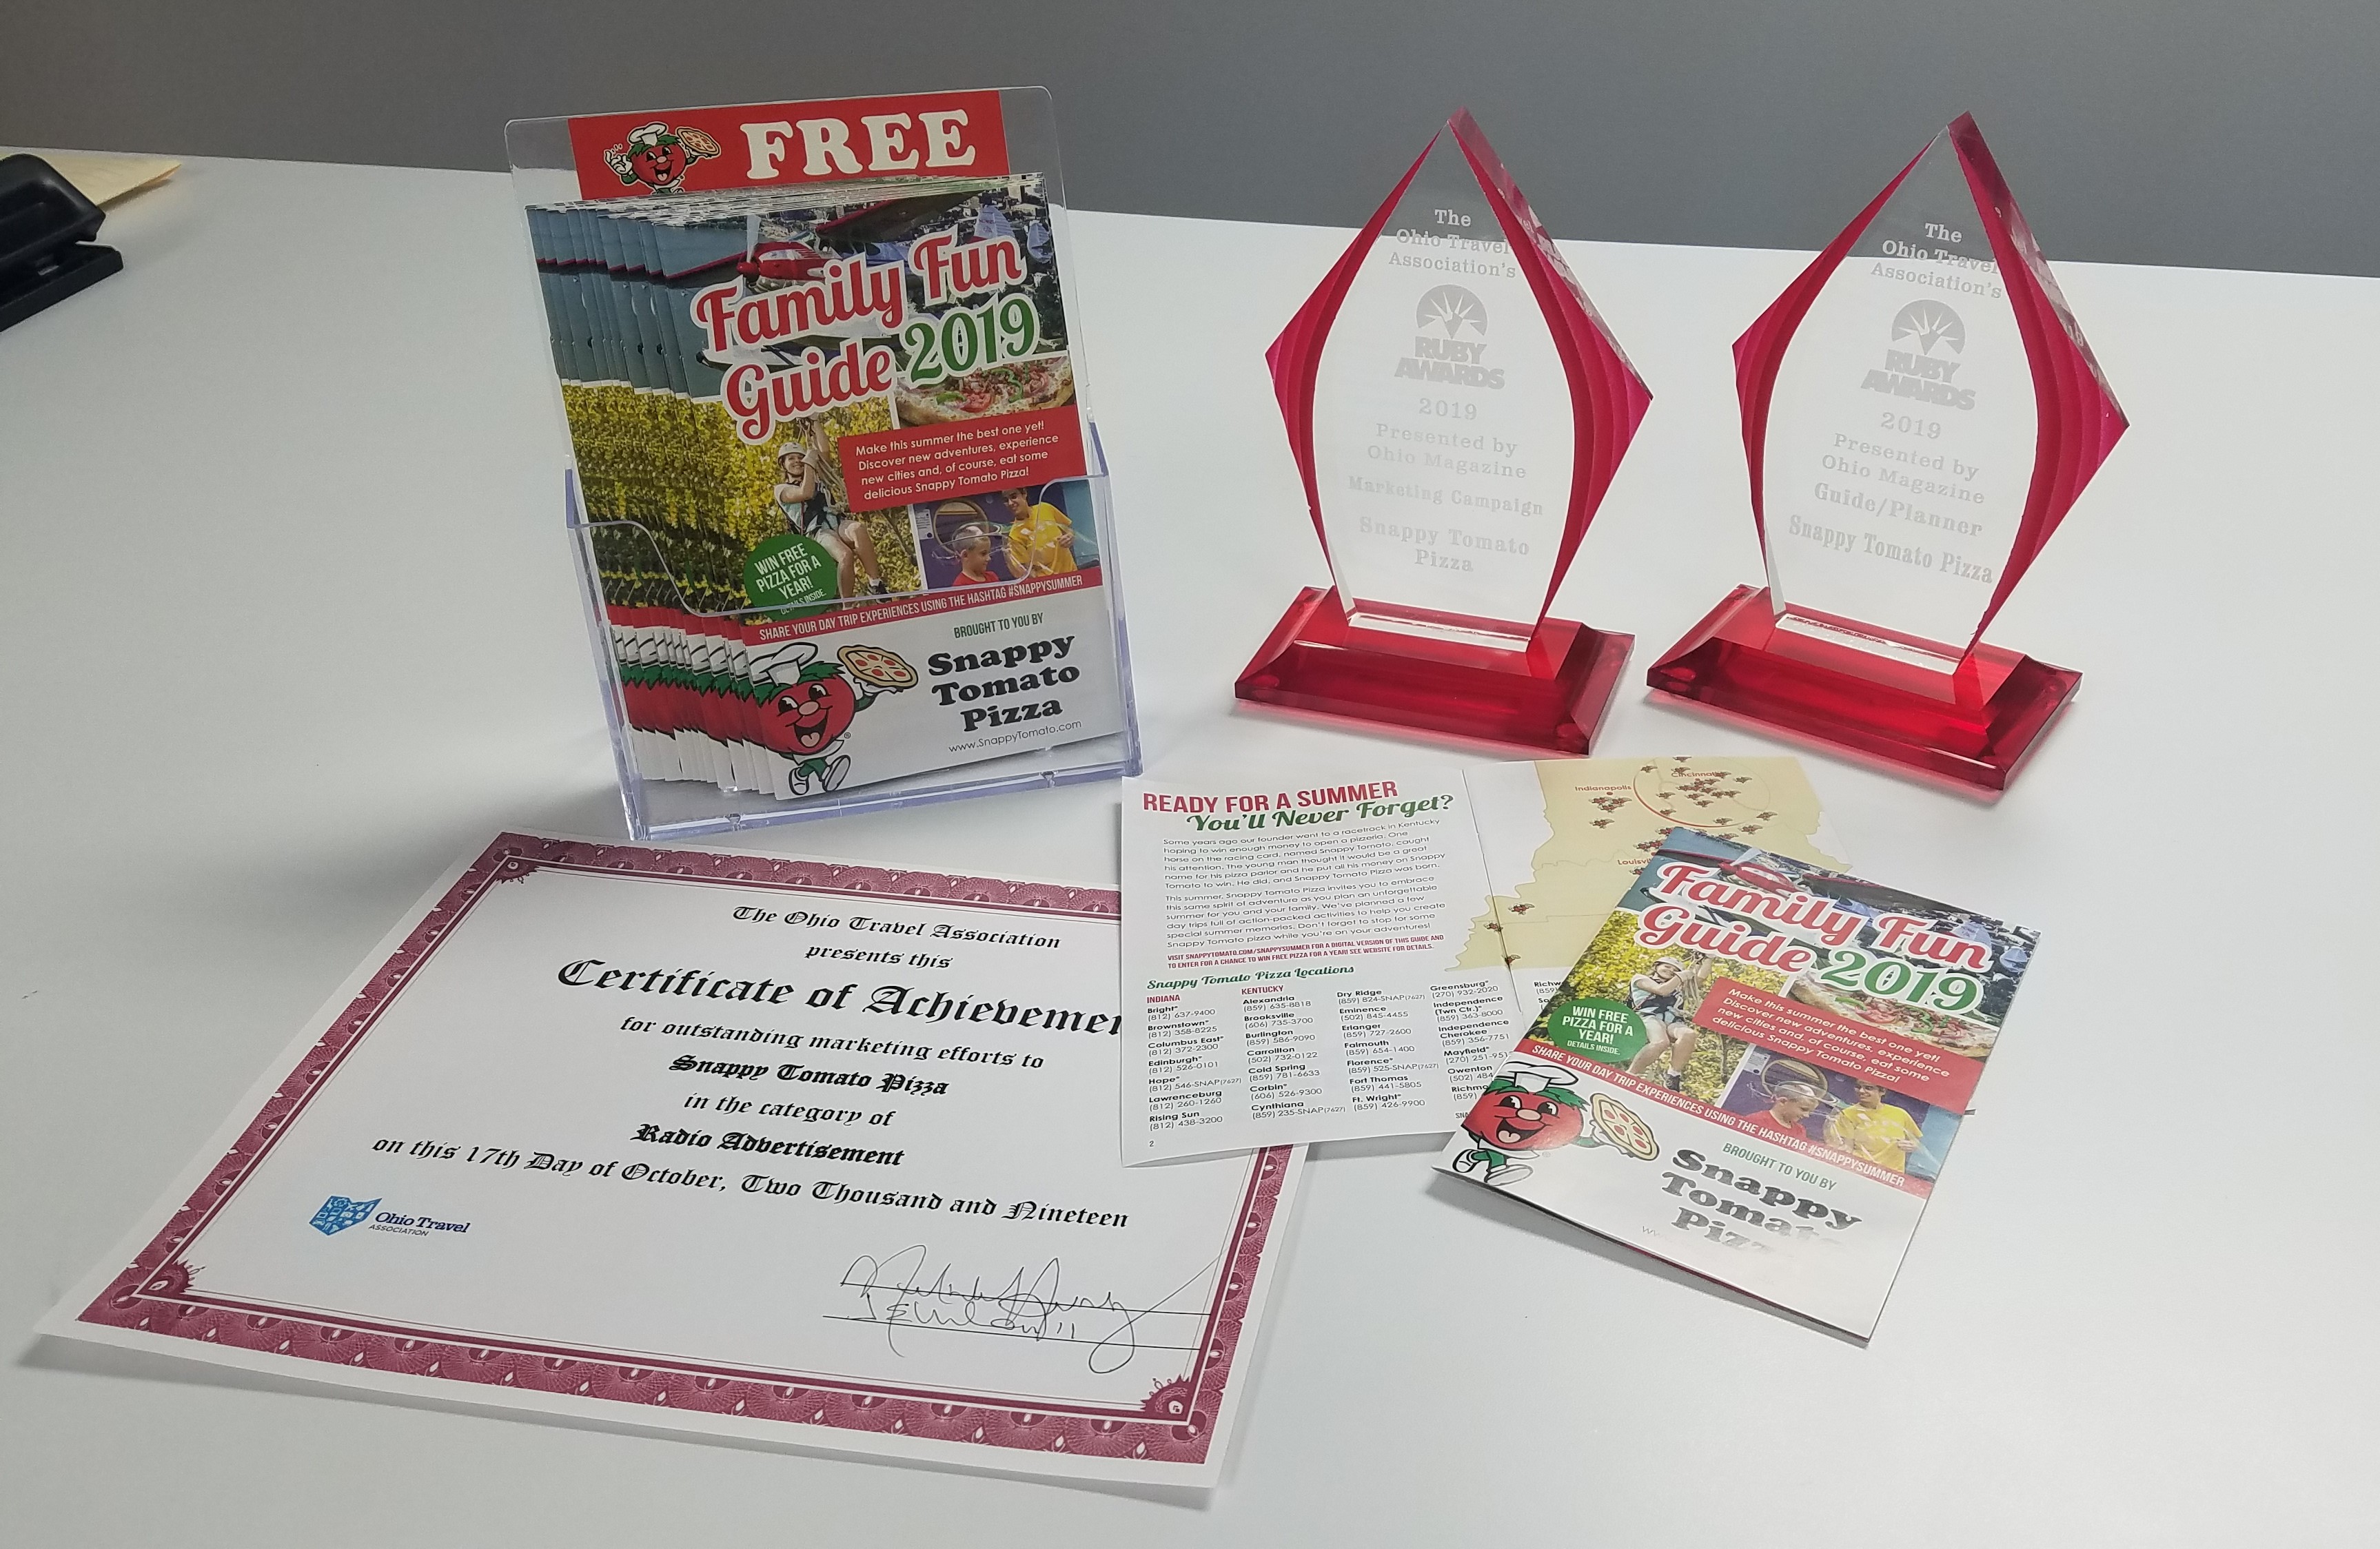 Ruby Awards Image:
Snappy Tomato Pizza Family Fun Guide 2019 marketing campaign named a Ruby Award winner, best in class by the Ohio Travel Association - www.OhioTravel.org
#Winner #OhioTravel #Pizza #SnappySummer #SnappyTomato
